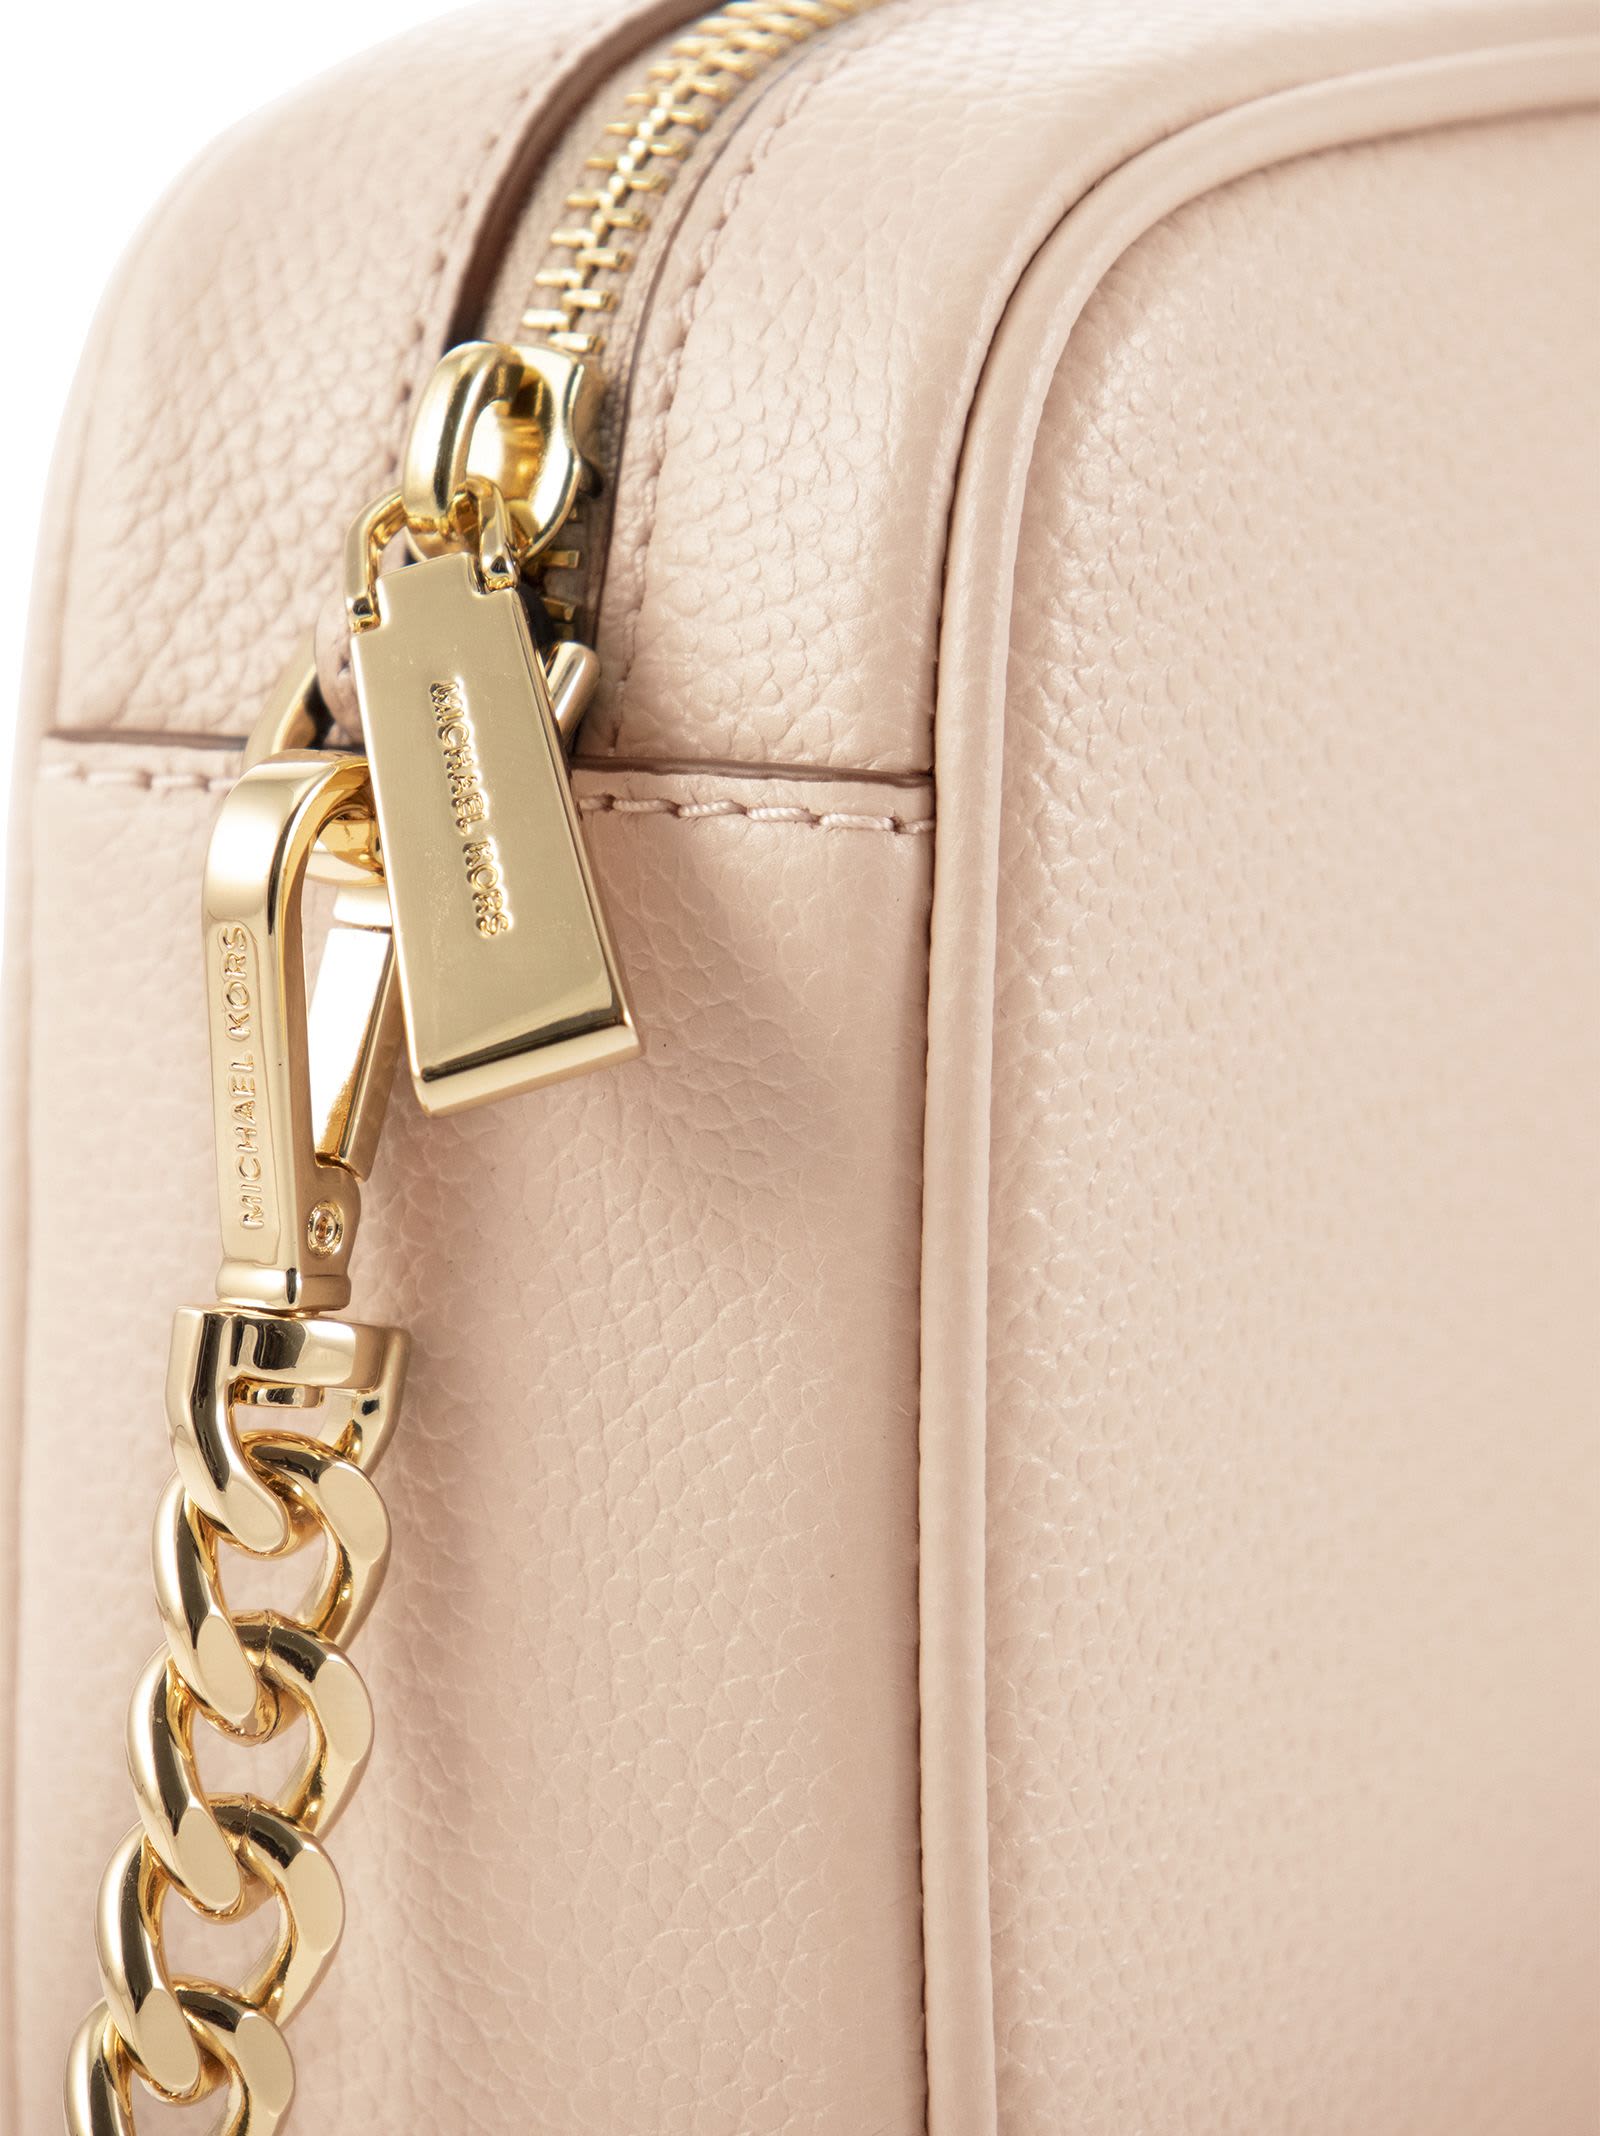 Michael Kors Ginny - Borsa A Tracolla In Pelle In Pink